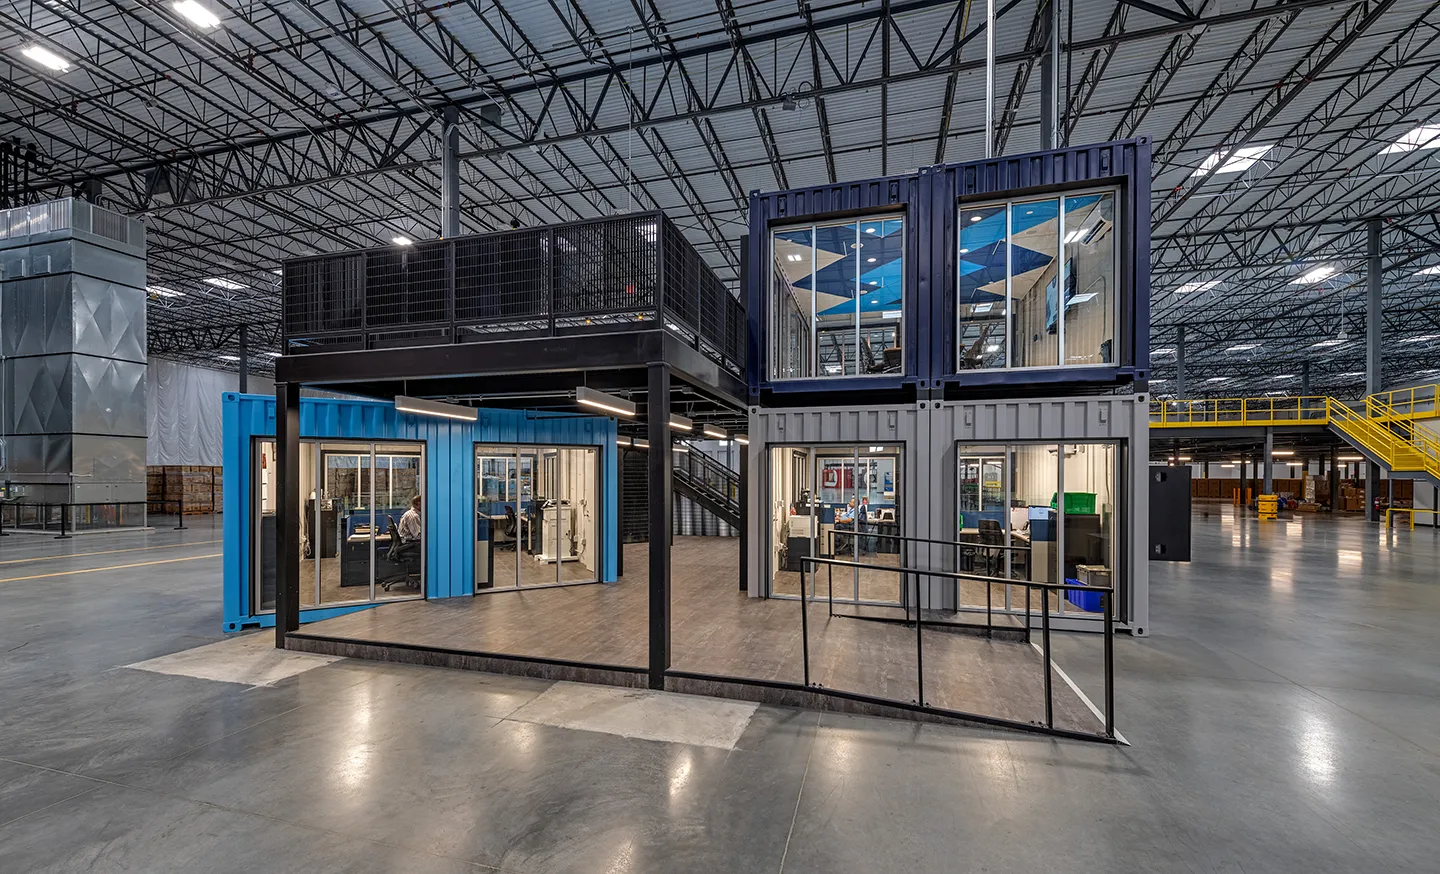 The client had a vision of using shipping containers to add office space, restrooms, and conference space to the large warehouse.